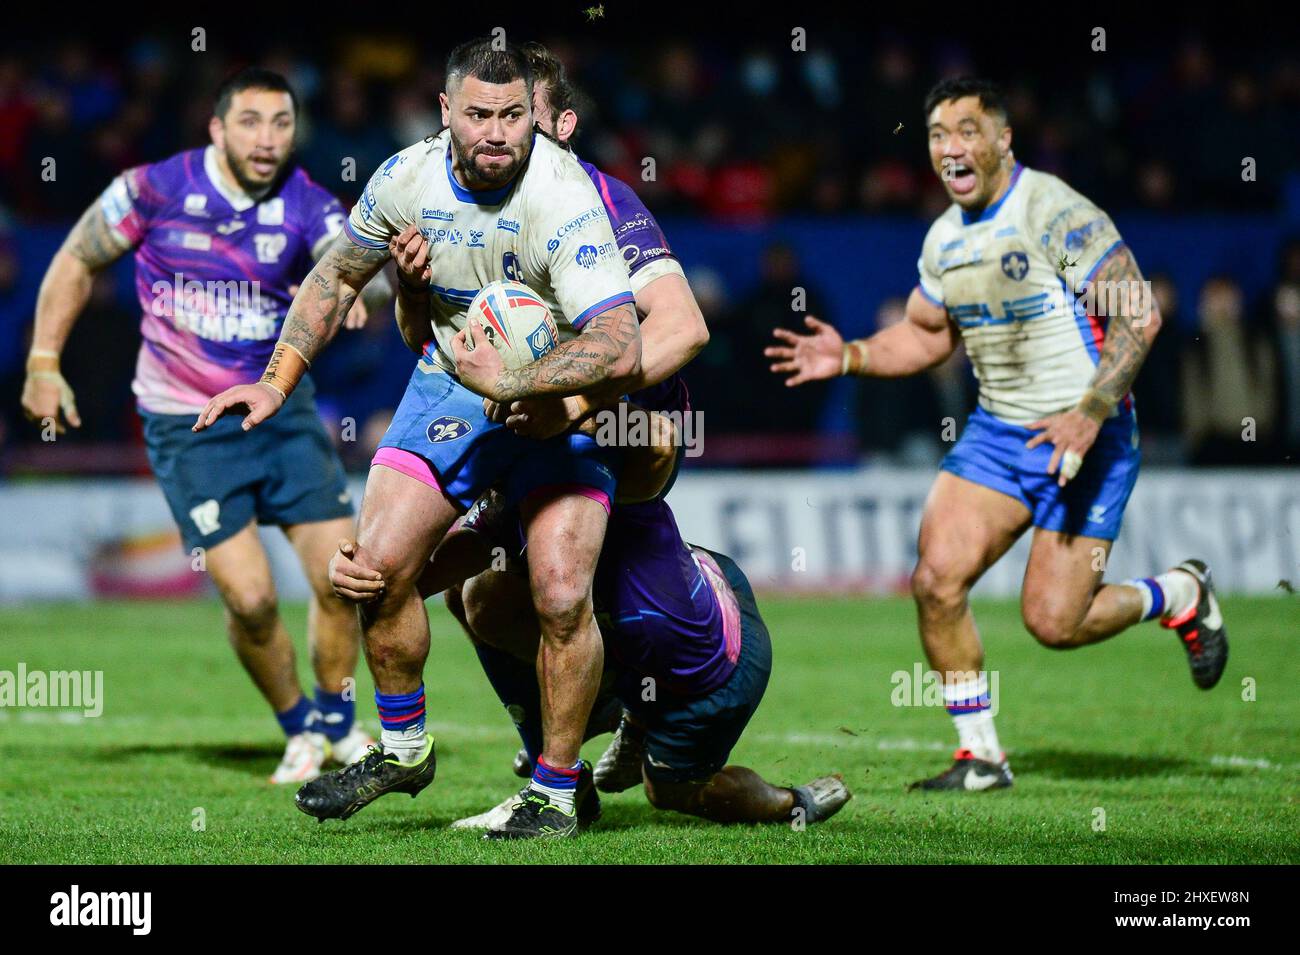 Wakefield, England - 11th March 2022 -  Wakefield Trinity's David Fifita on the charge. Rugby League Betfred Super League Round 5 Wakefield Trinity vs Toulouse Olympique at Be Well Support Stadium, Wakefield, UK  Dean Williams Stock Photo